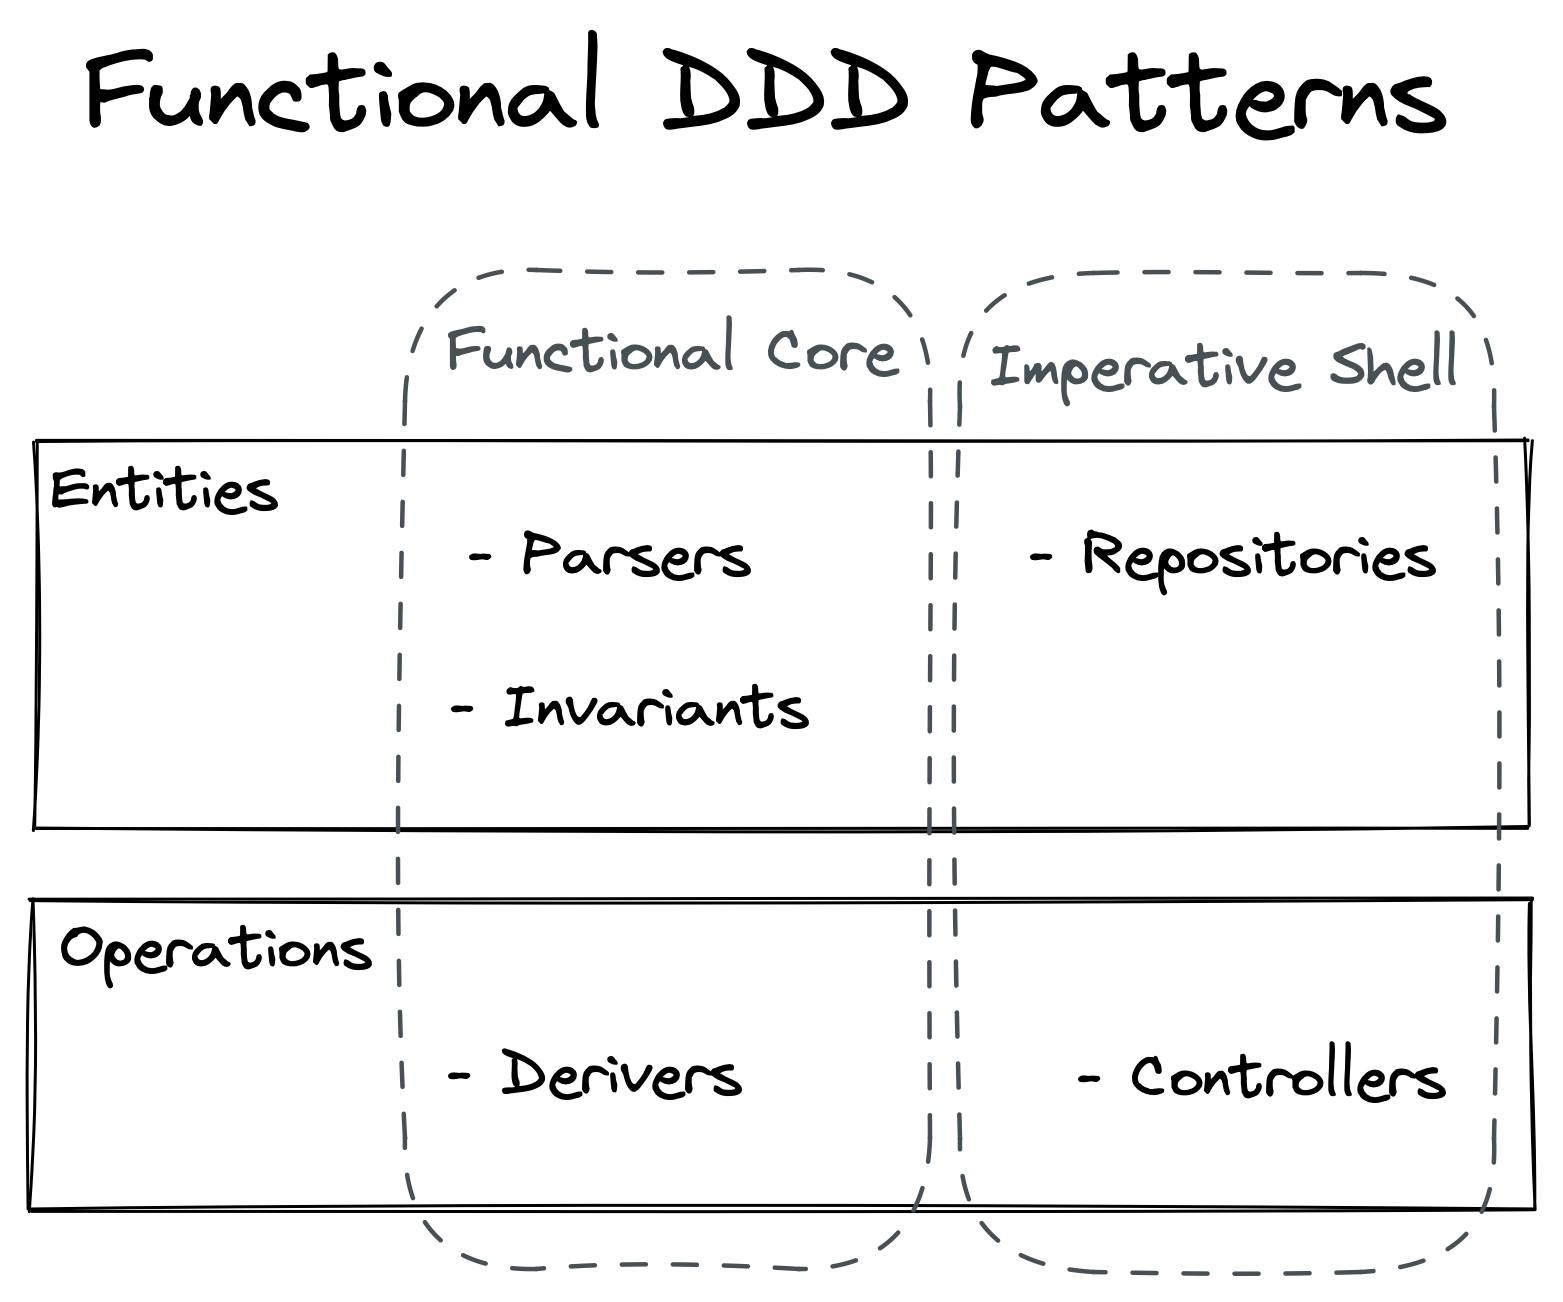 Functional DDD Patterns.excalidraw.png